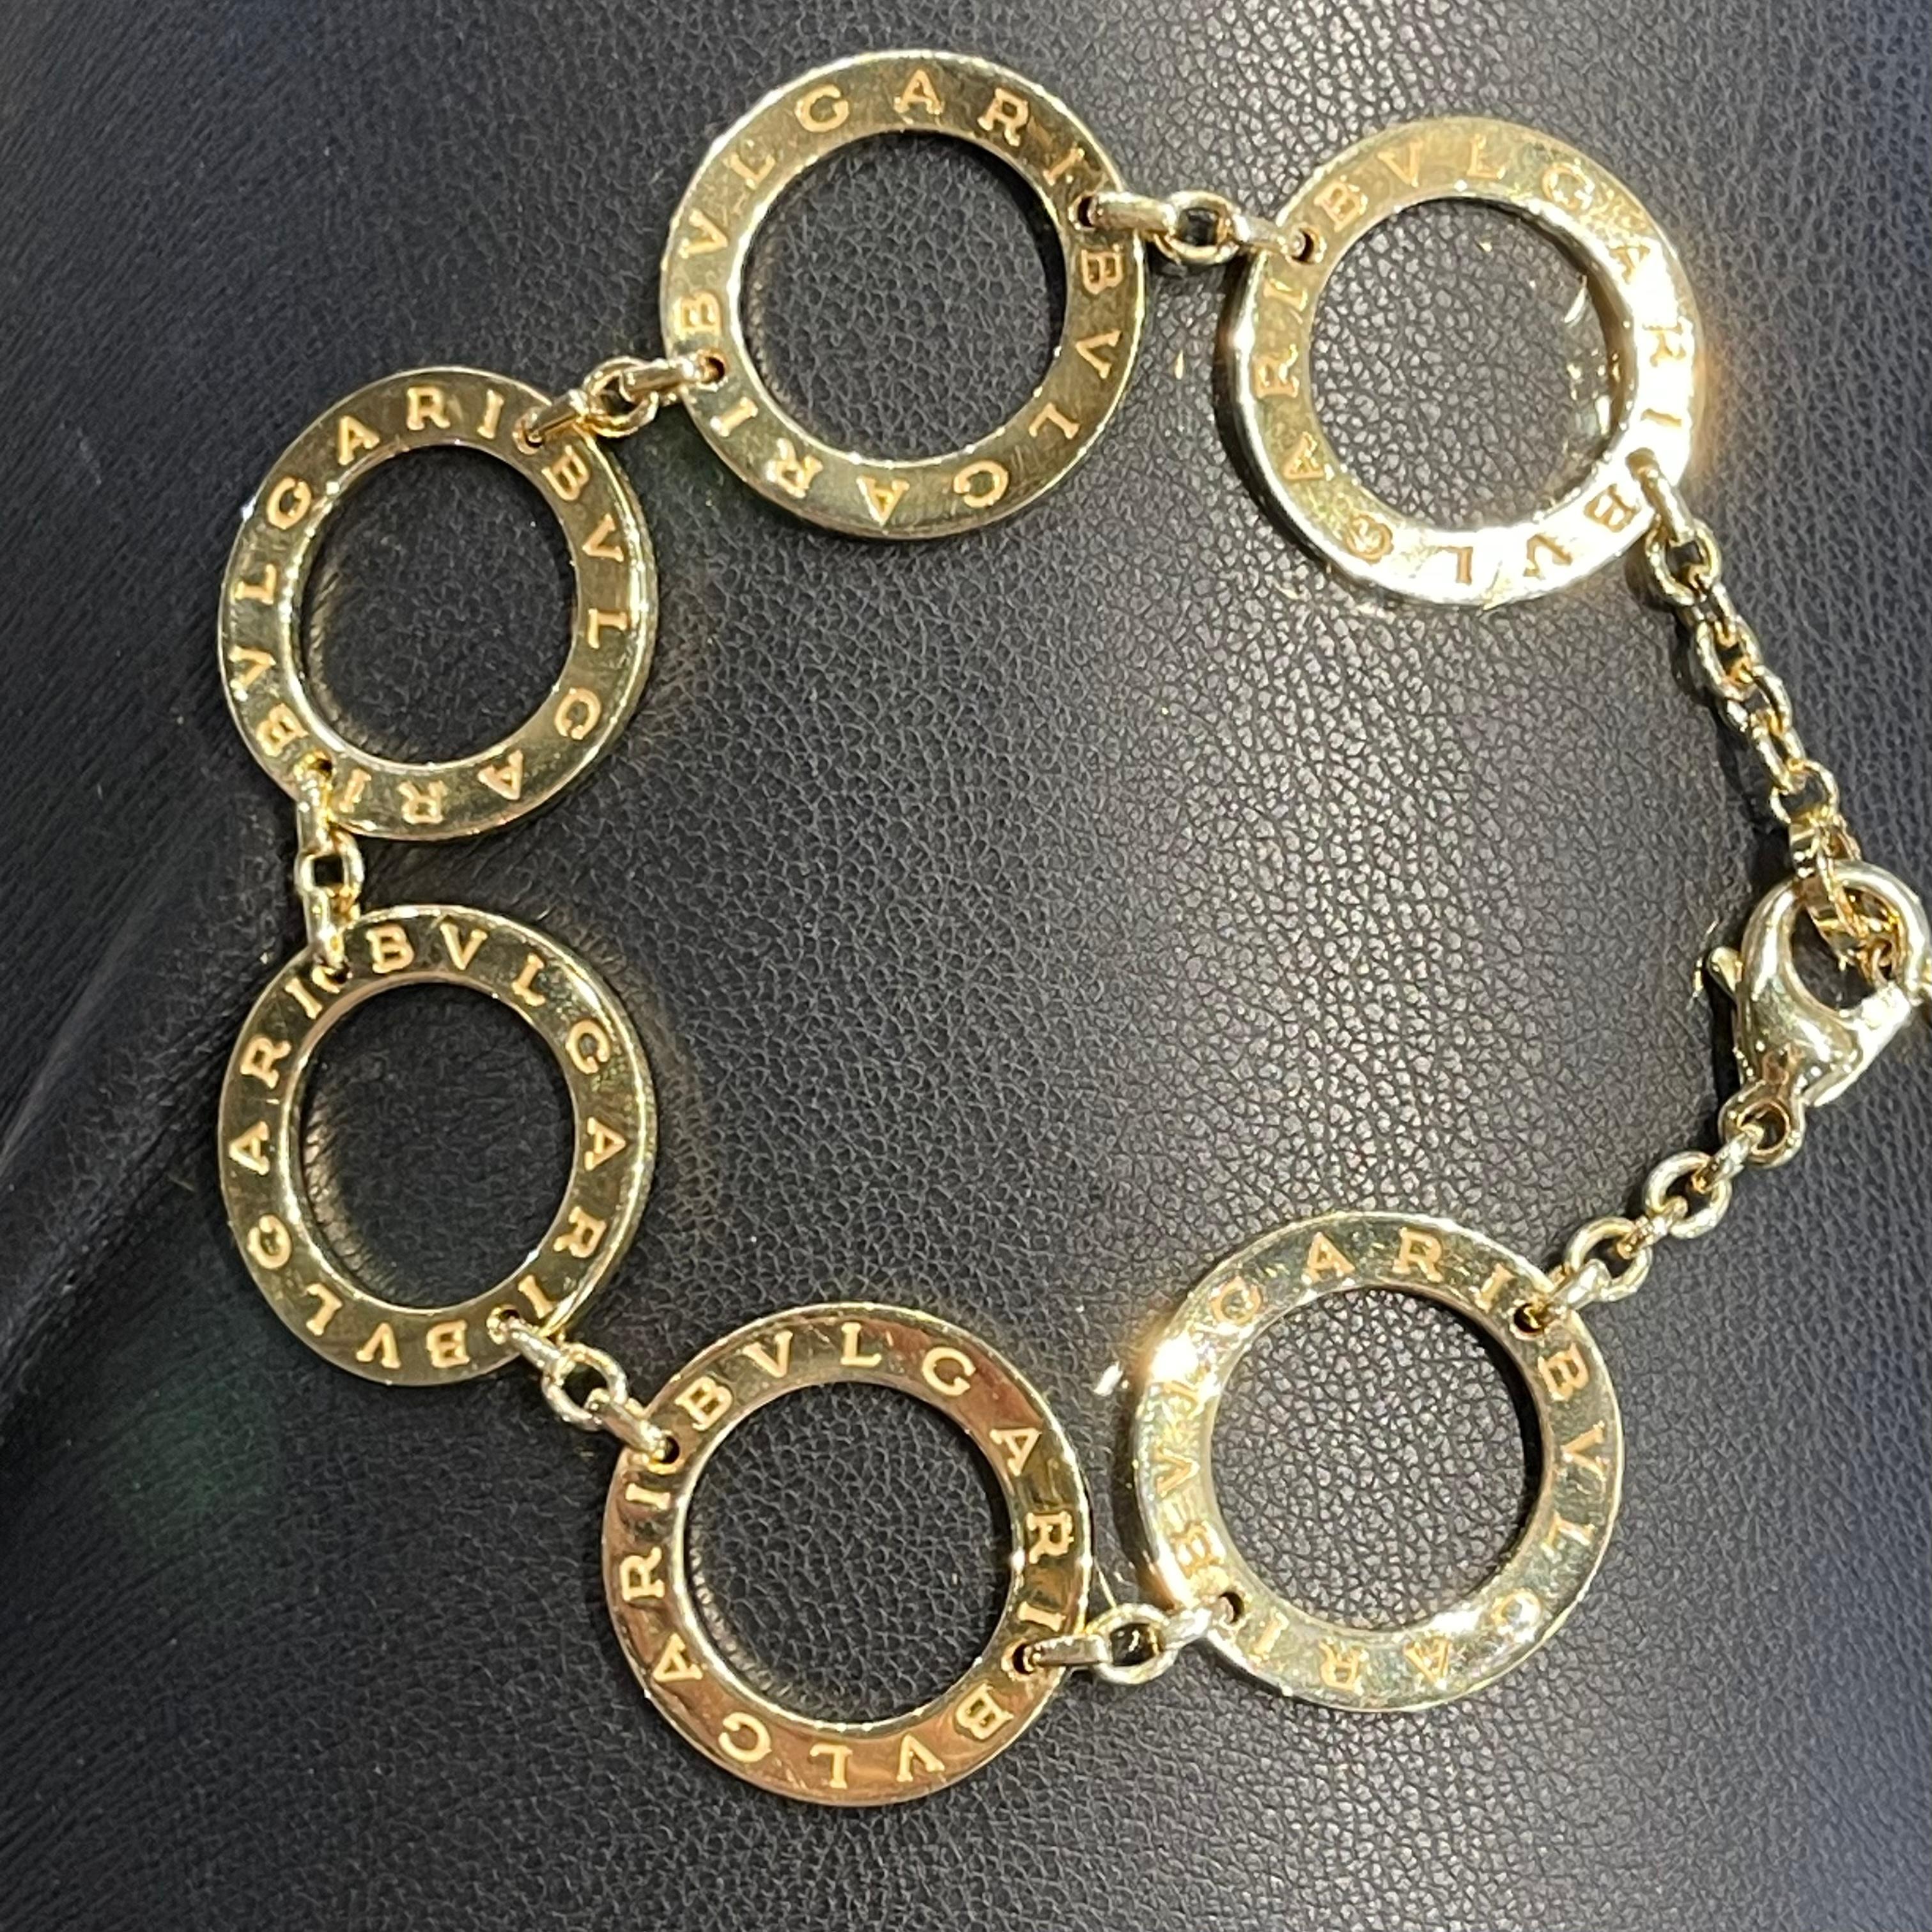 Designer: Bvlgari 

Collection: Bvlgari Singature 

Metal: Yellow Gold 

Metal Purity: 18k   

Length: Approx. 8 in

Total Item Weight (grams): 28.5 g

Hallmarks: Bvlgari; Au 750

Includes:  24 Months Brilliance Jewels Warranty

                    